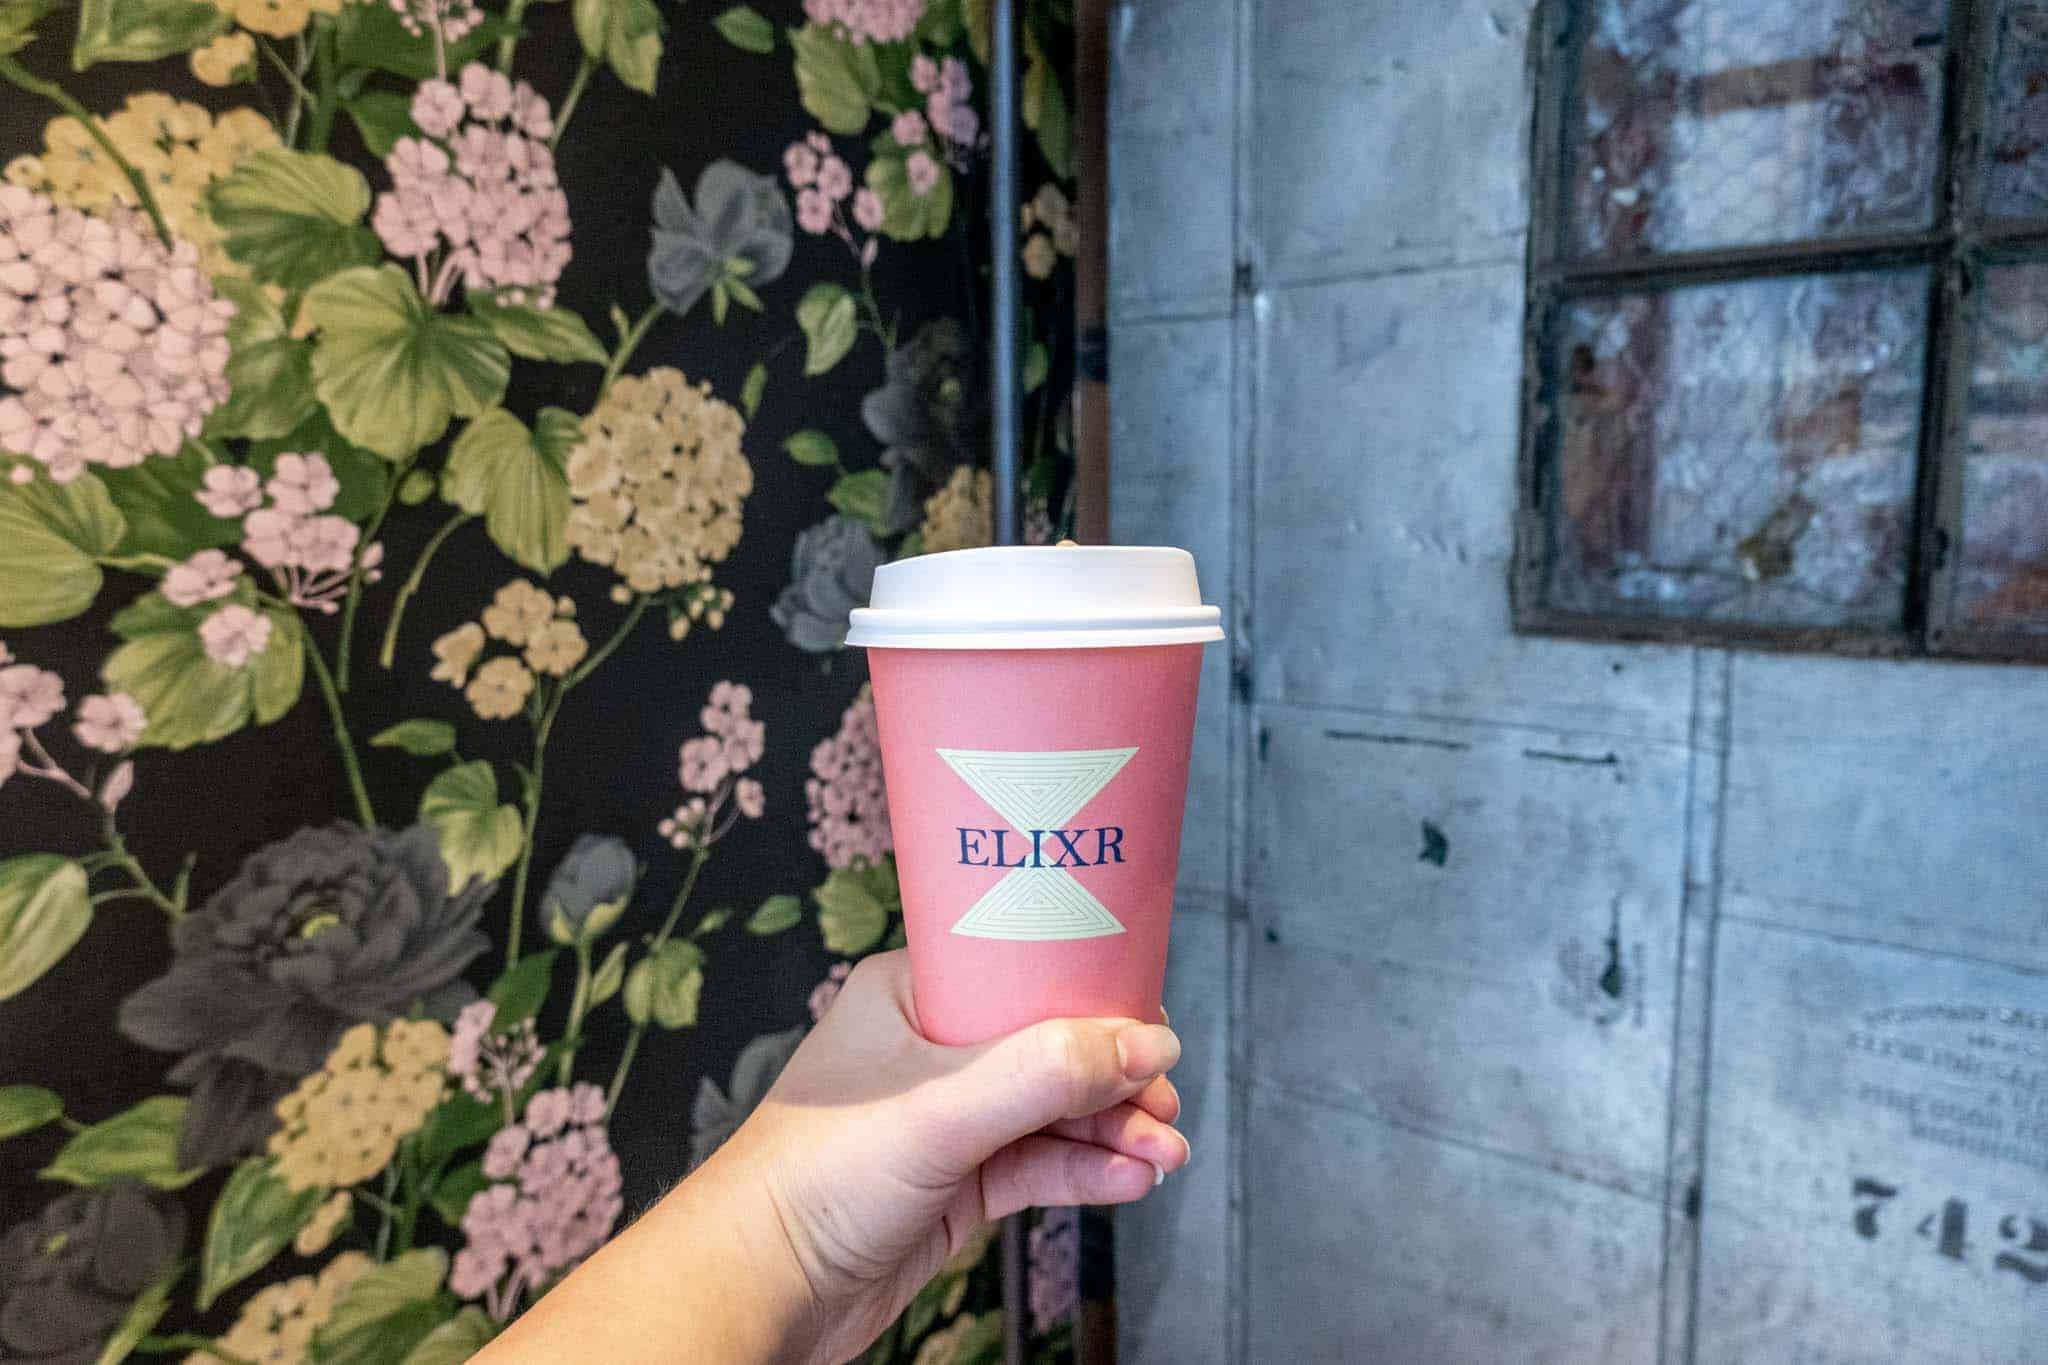 Hand holding a pink coffee cup labeled "Elixr"